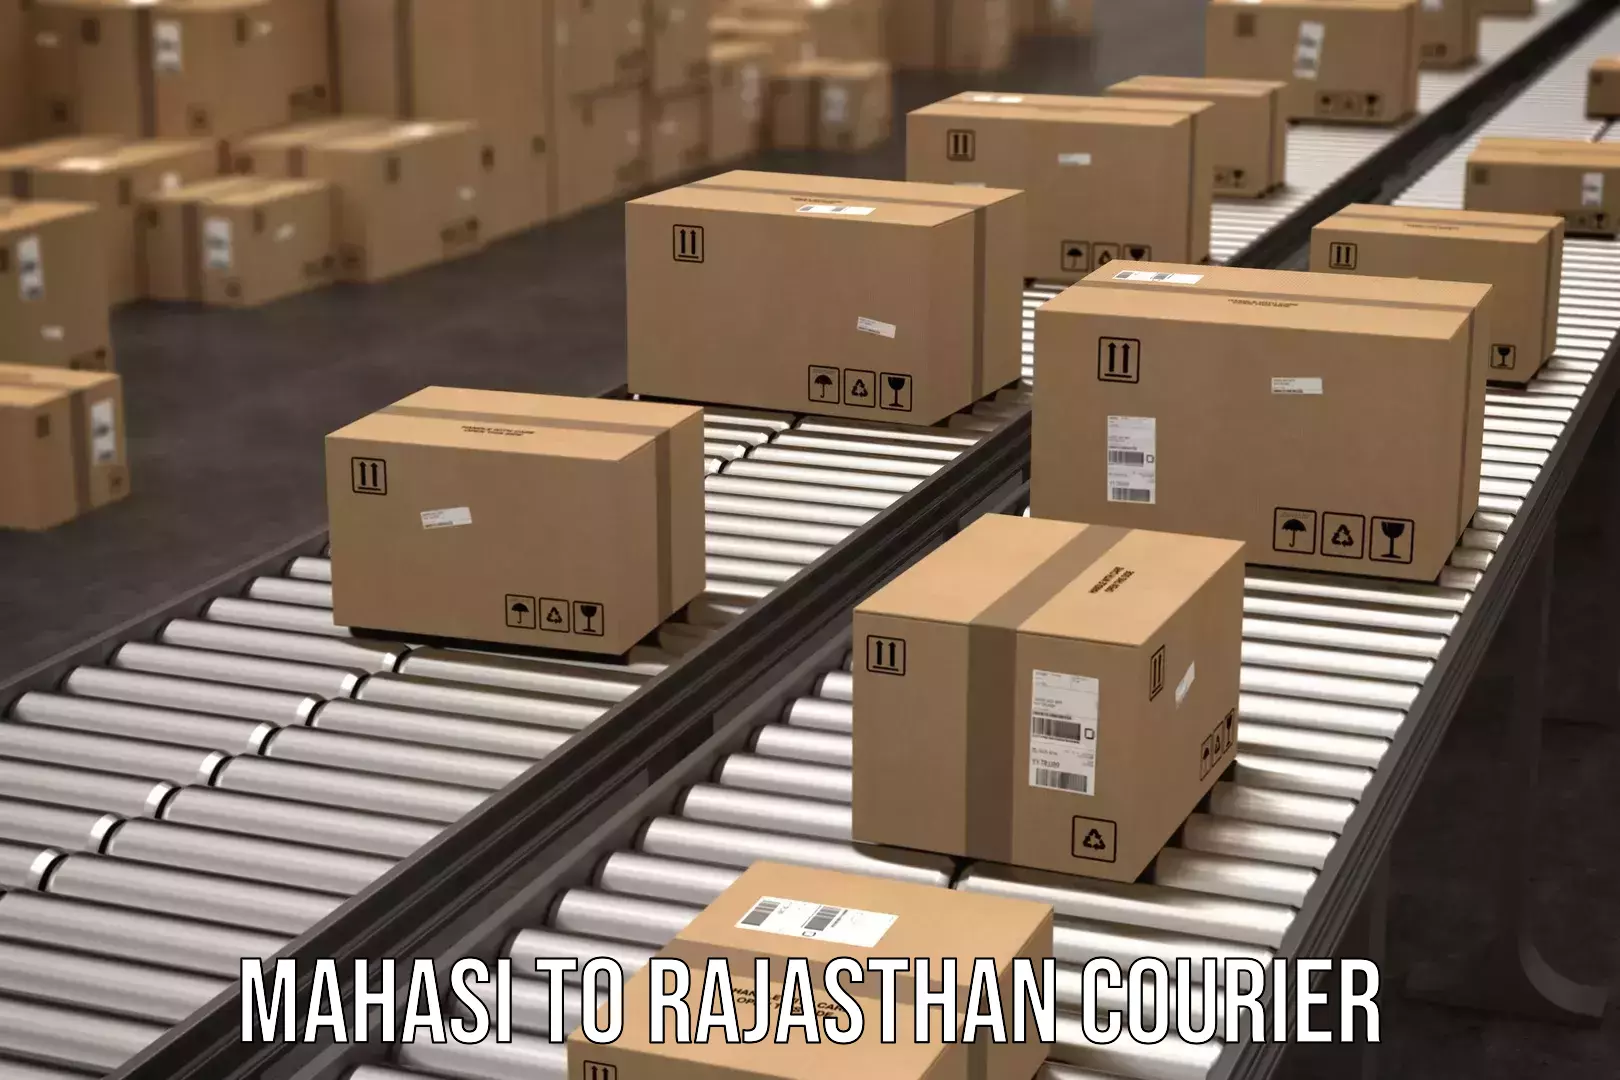 State-of-the-art courier technology Mahasi to Rajasthan